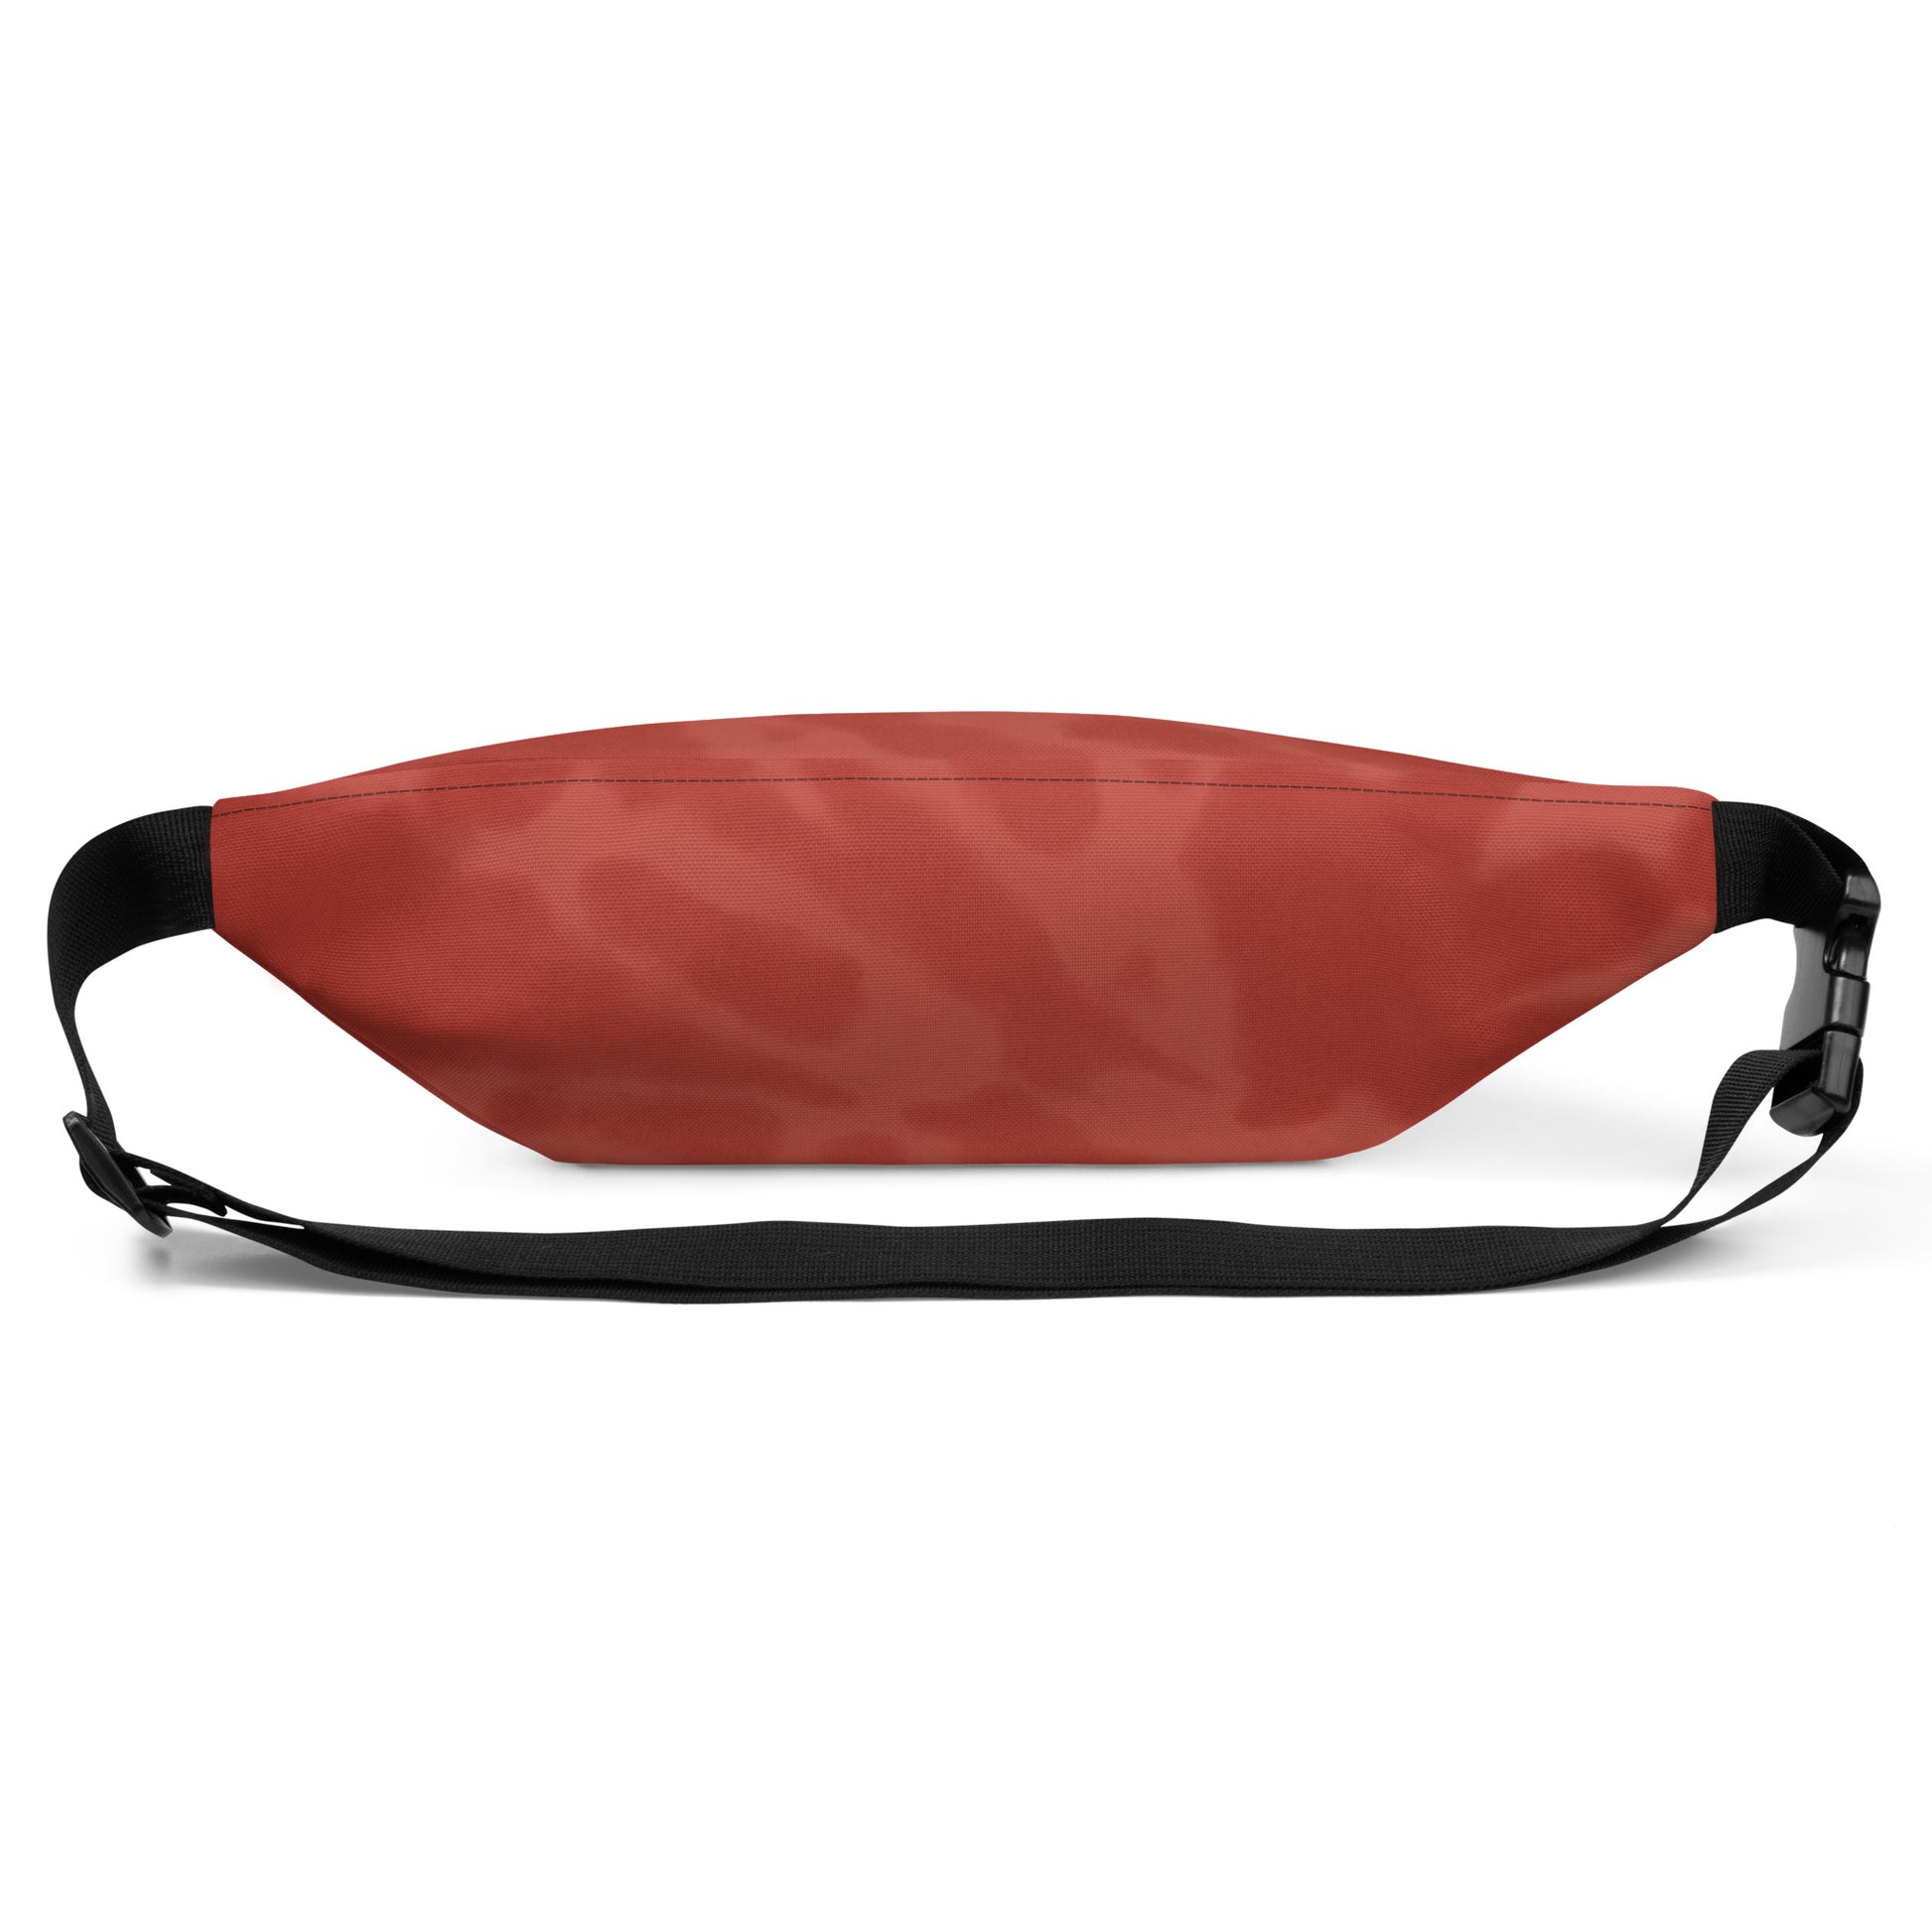 Travel Gift Fanny Pack - Red Tie-Dye • ICT Wichita • YHM Designs - Image 09